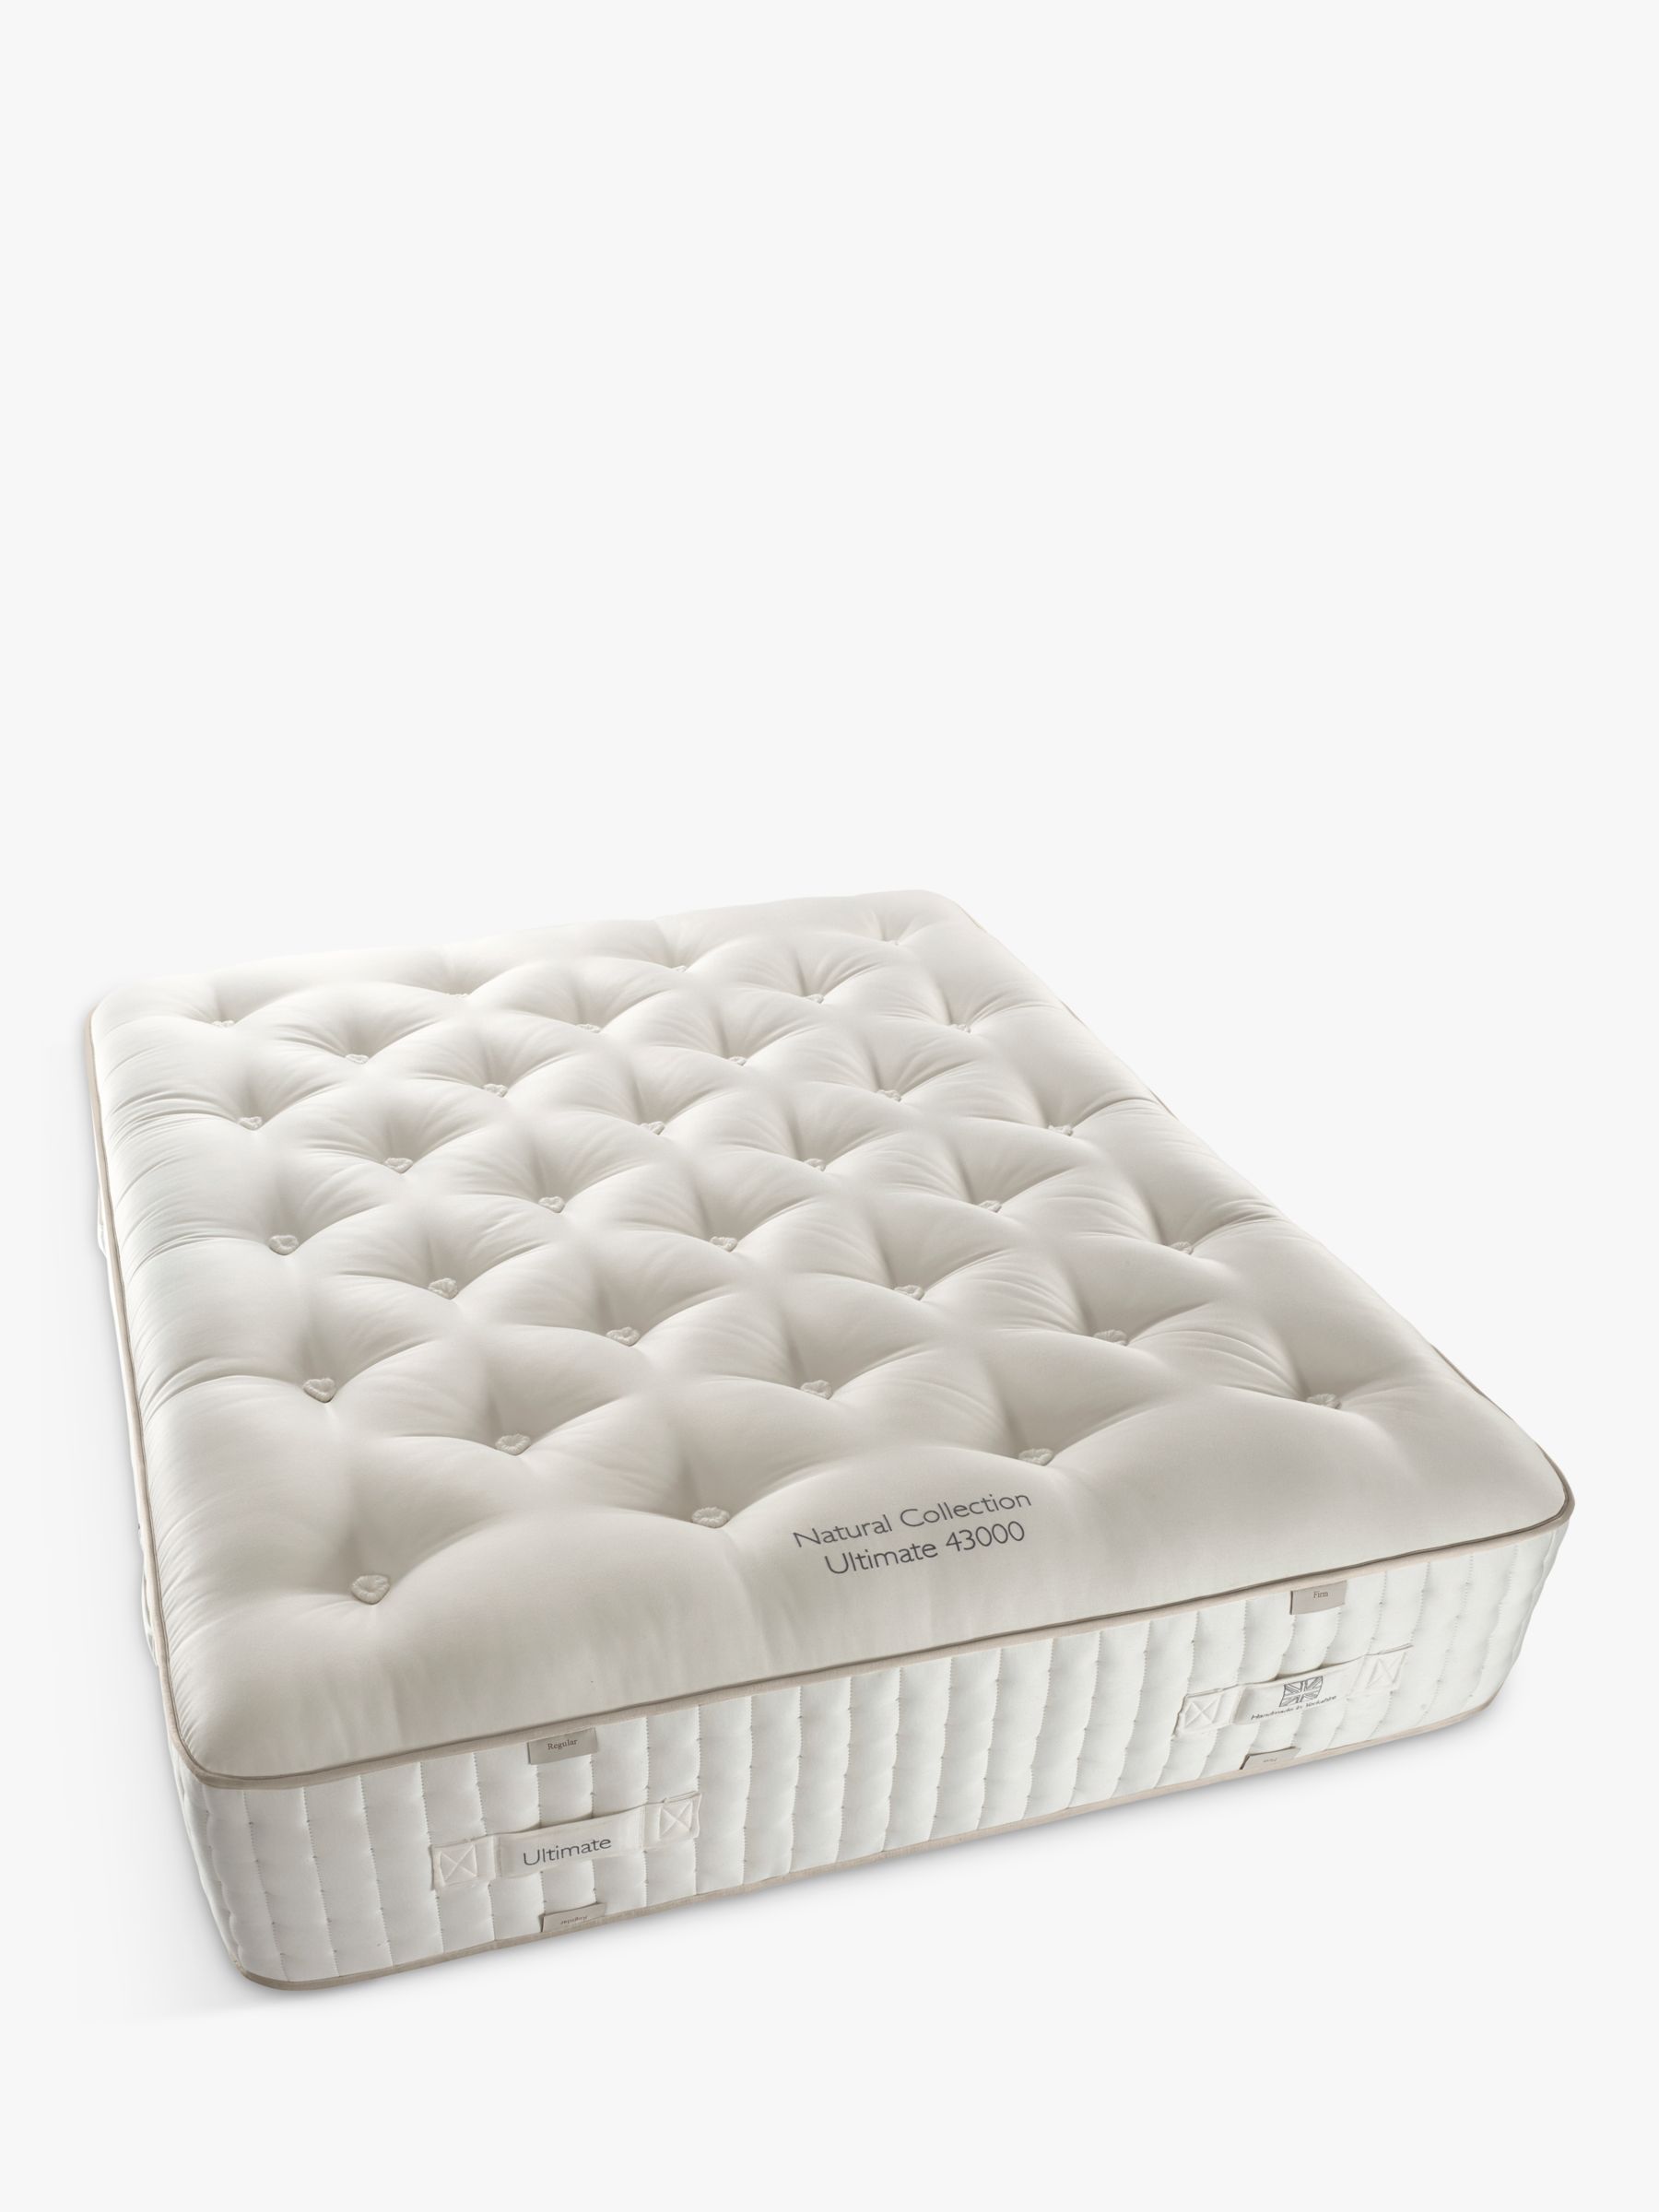 Photo of John lewis ultimate natural collection 43000 emperor firmer tension pocket spring mattress